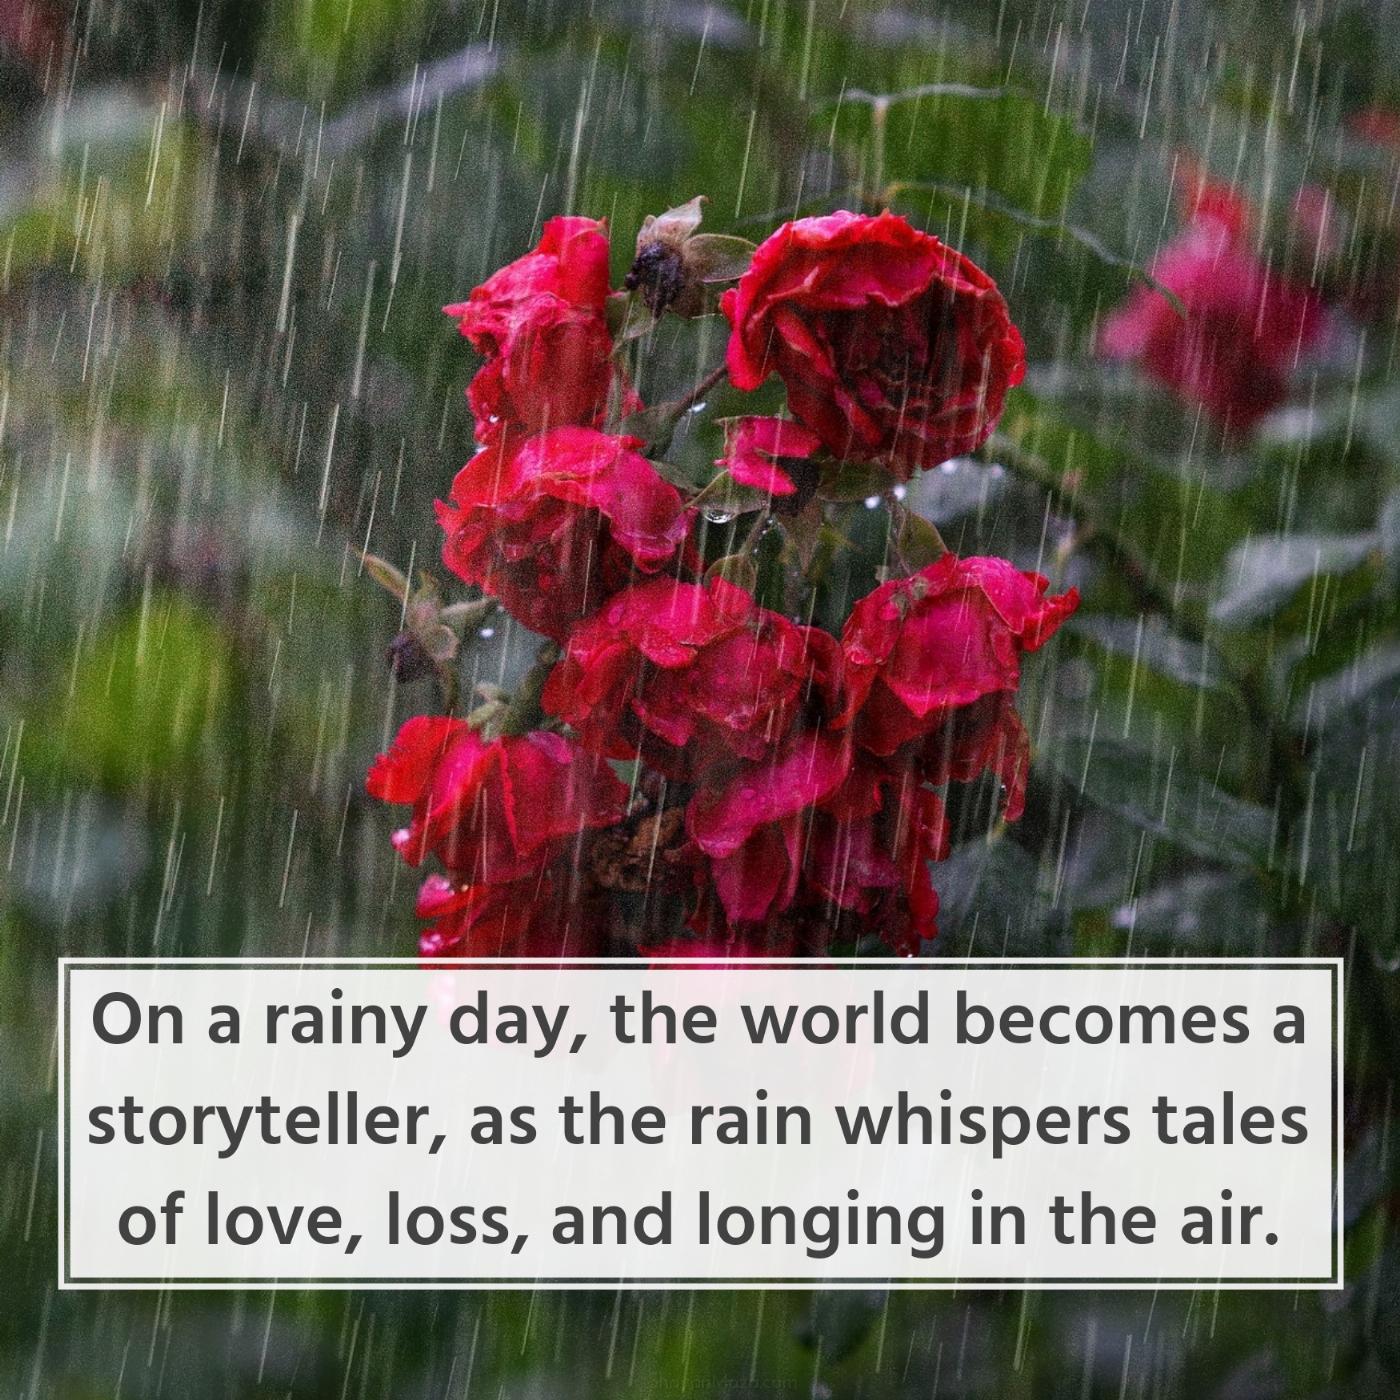 On a rainy day the world becomes a storyteller